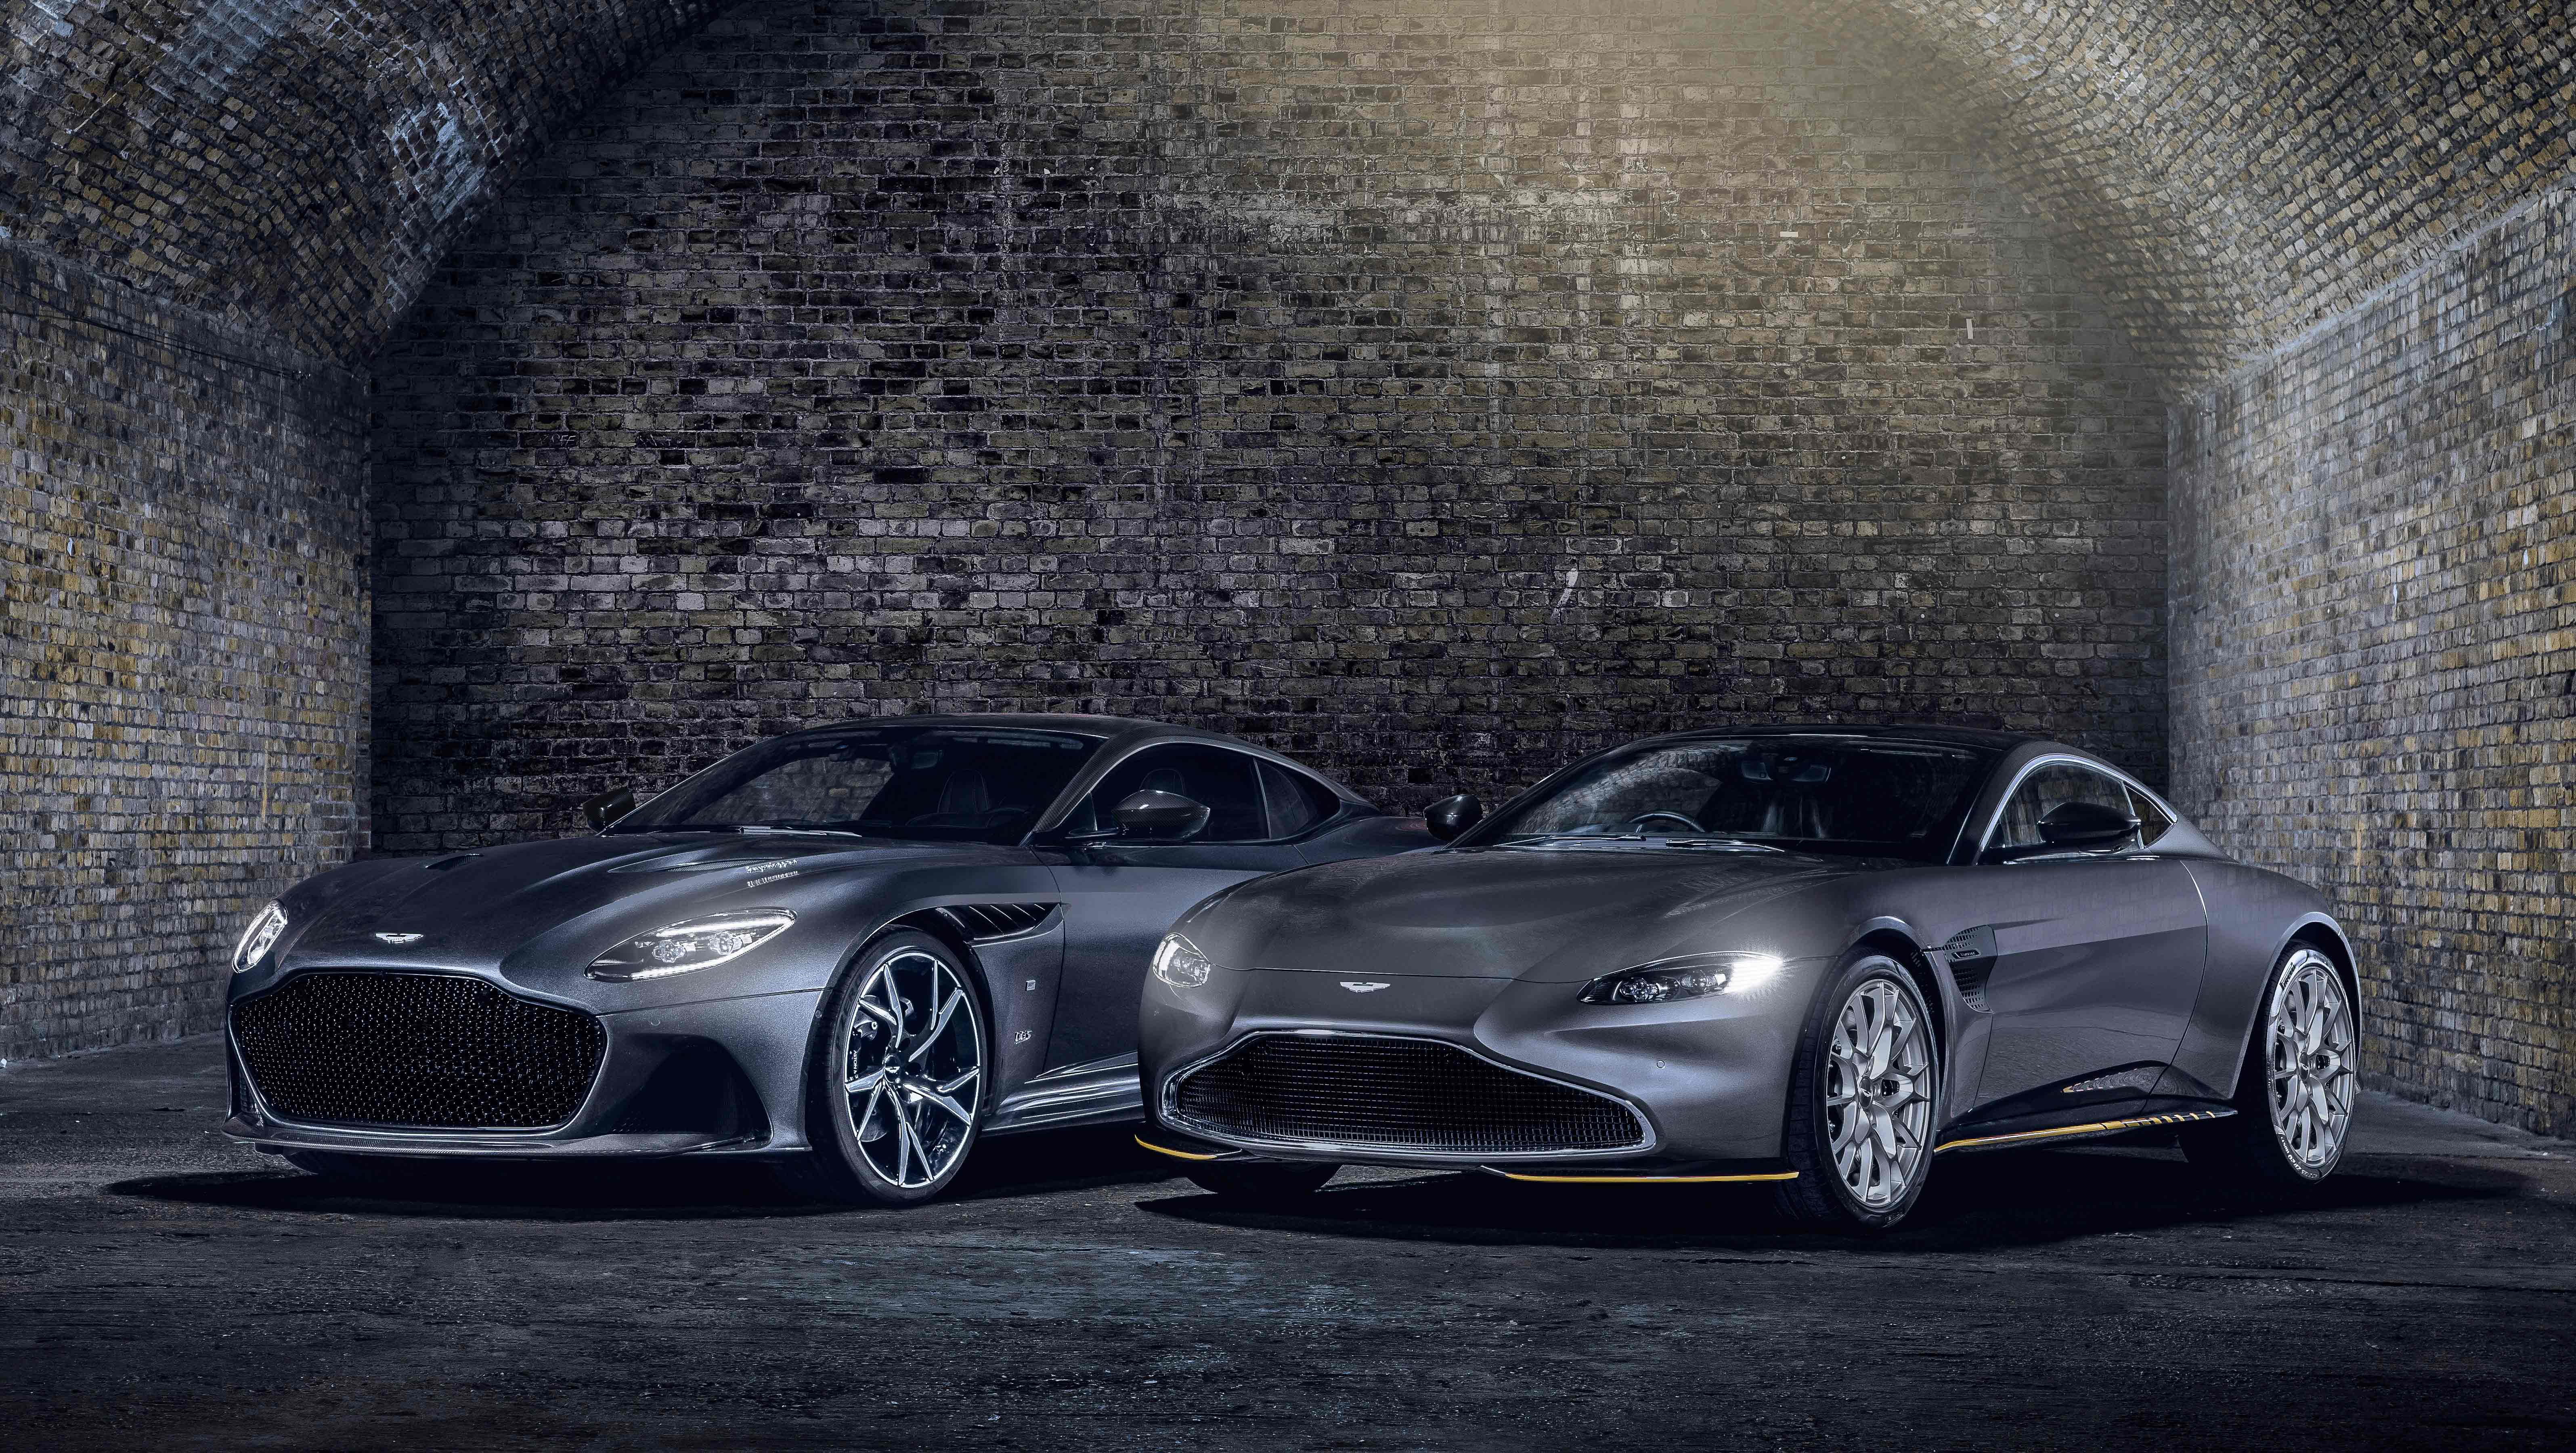 Q by aston martin creates new 007 limited edition sports cars to celebrate no time to die